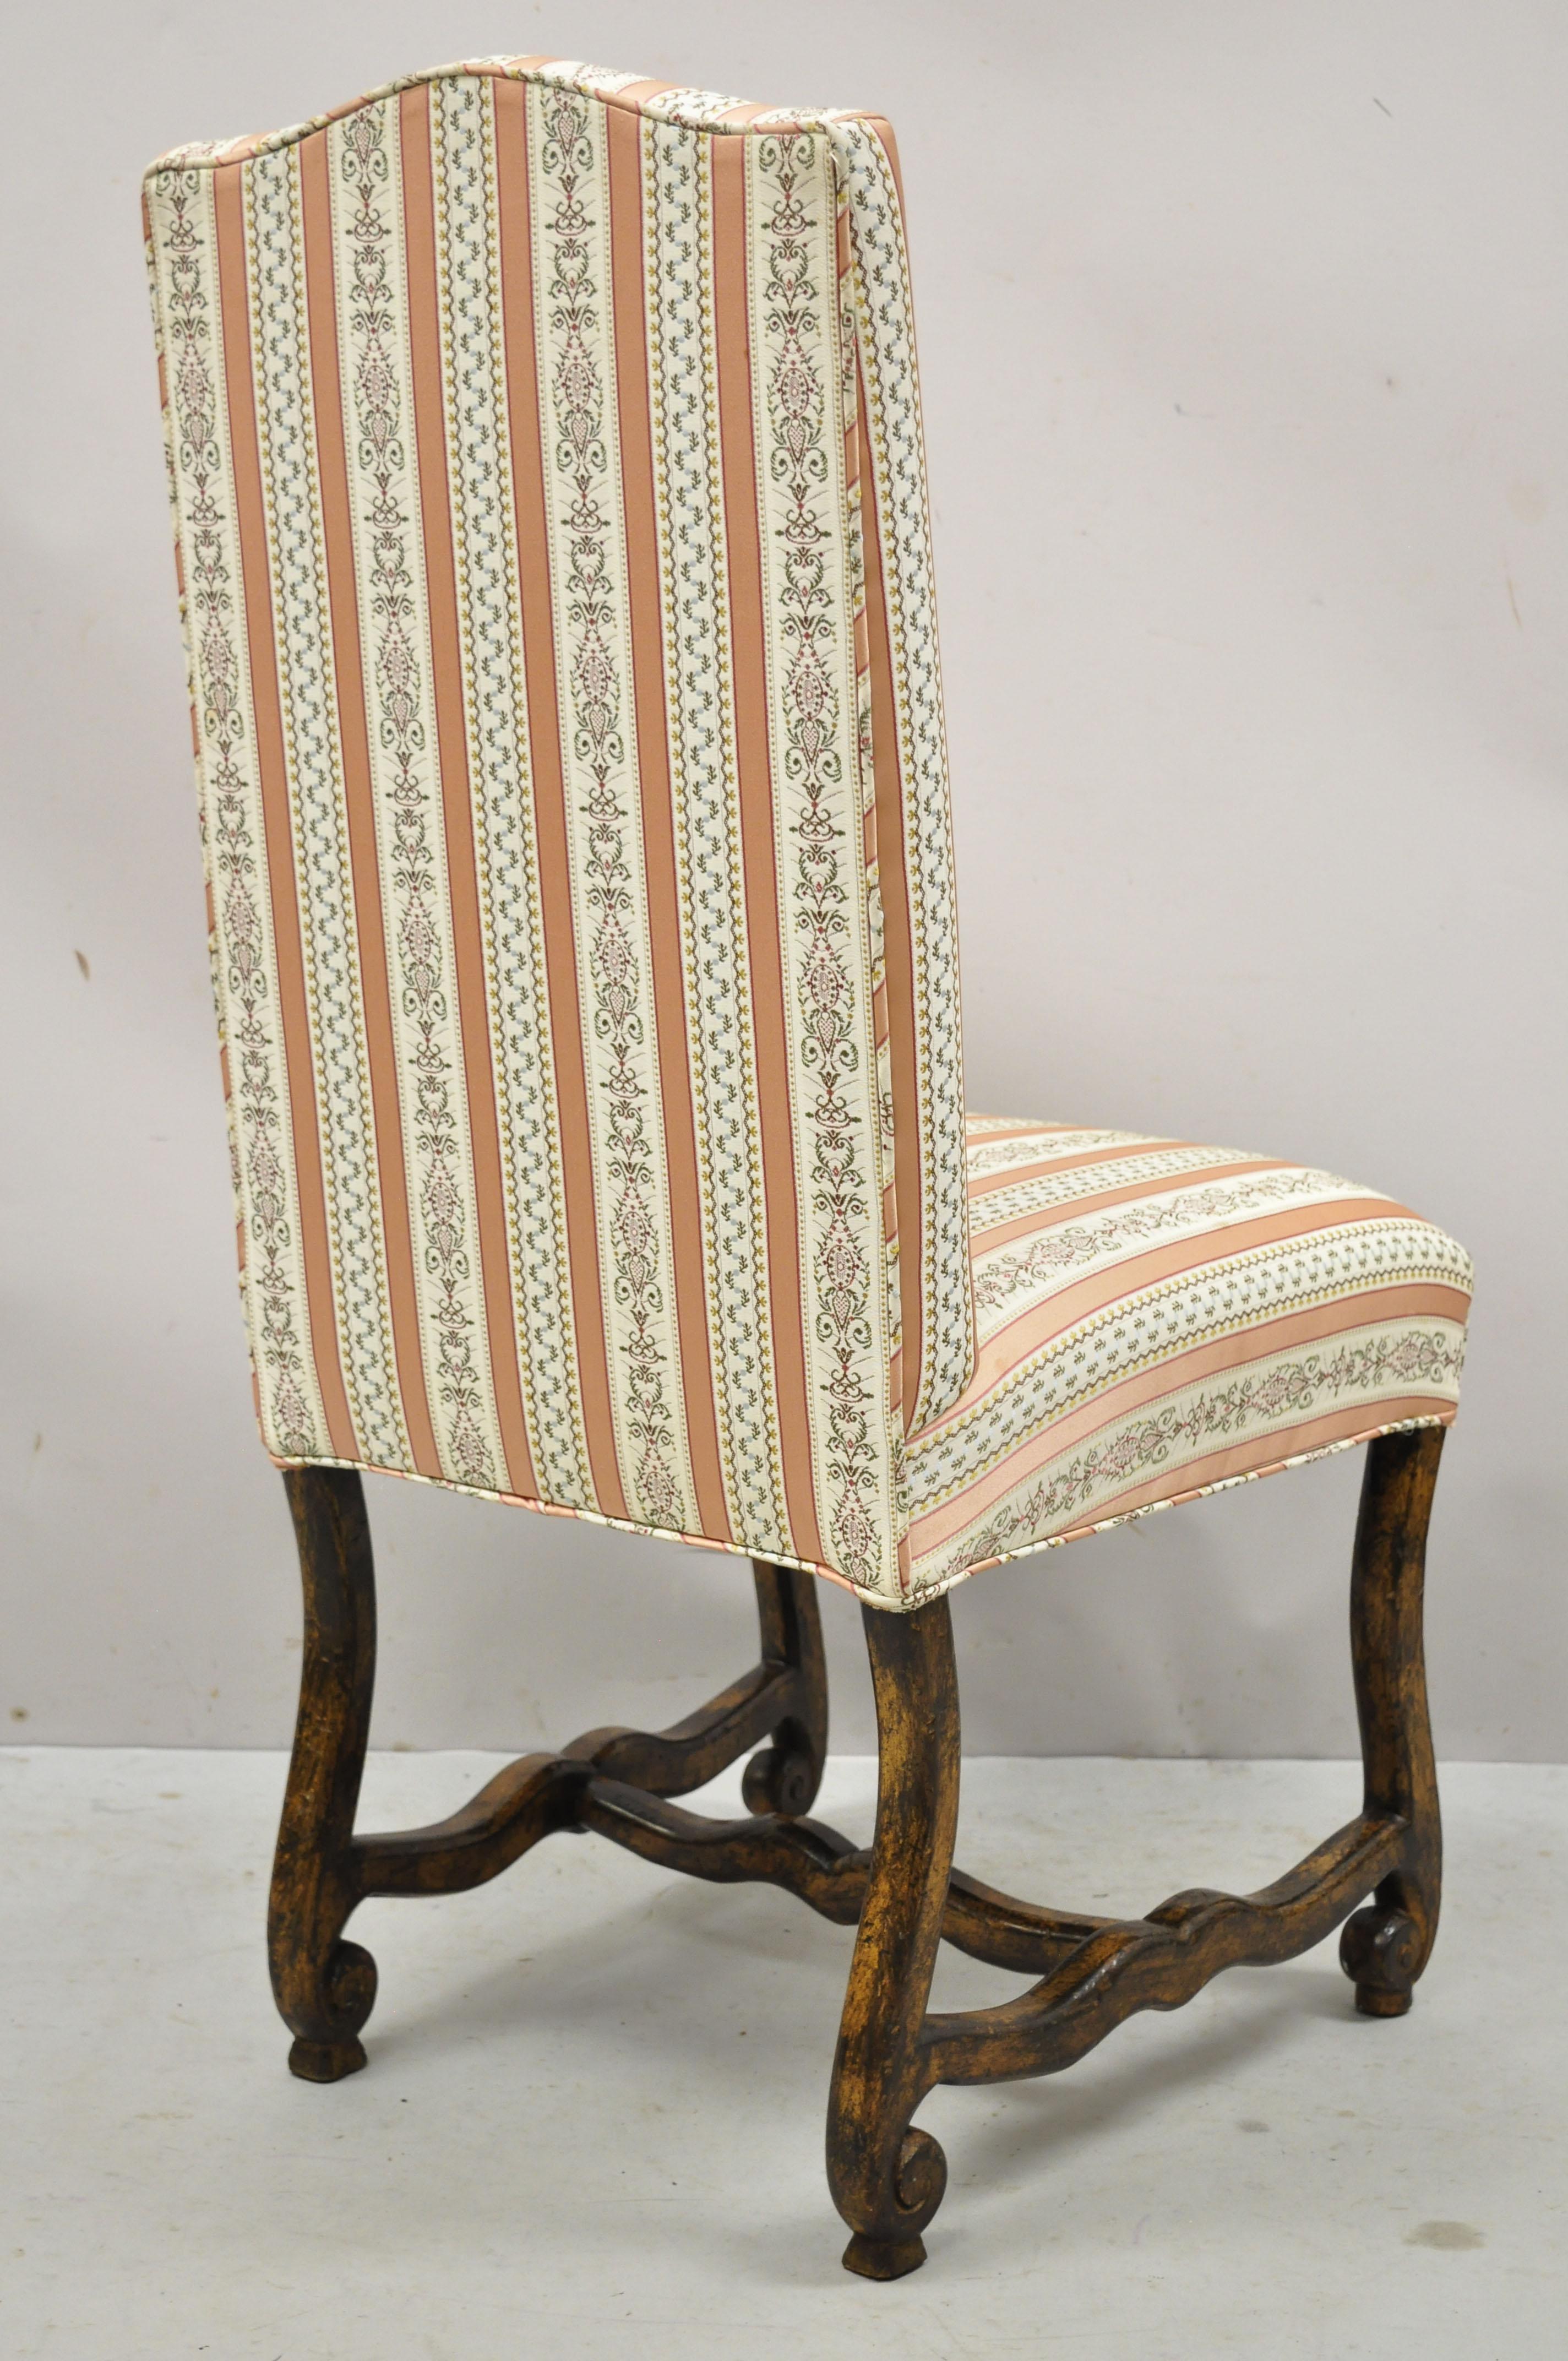 Fabric Italian Spanish Baroque Upholstered Back Distressed Wood Dining Chair, Set of 6